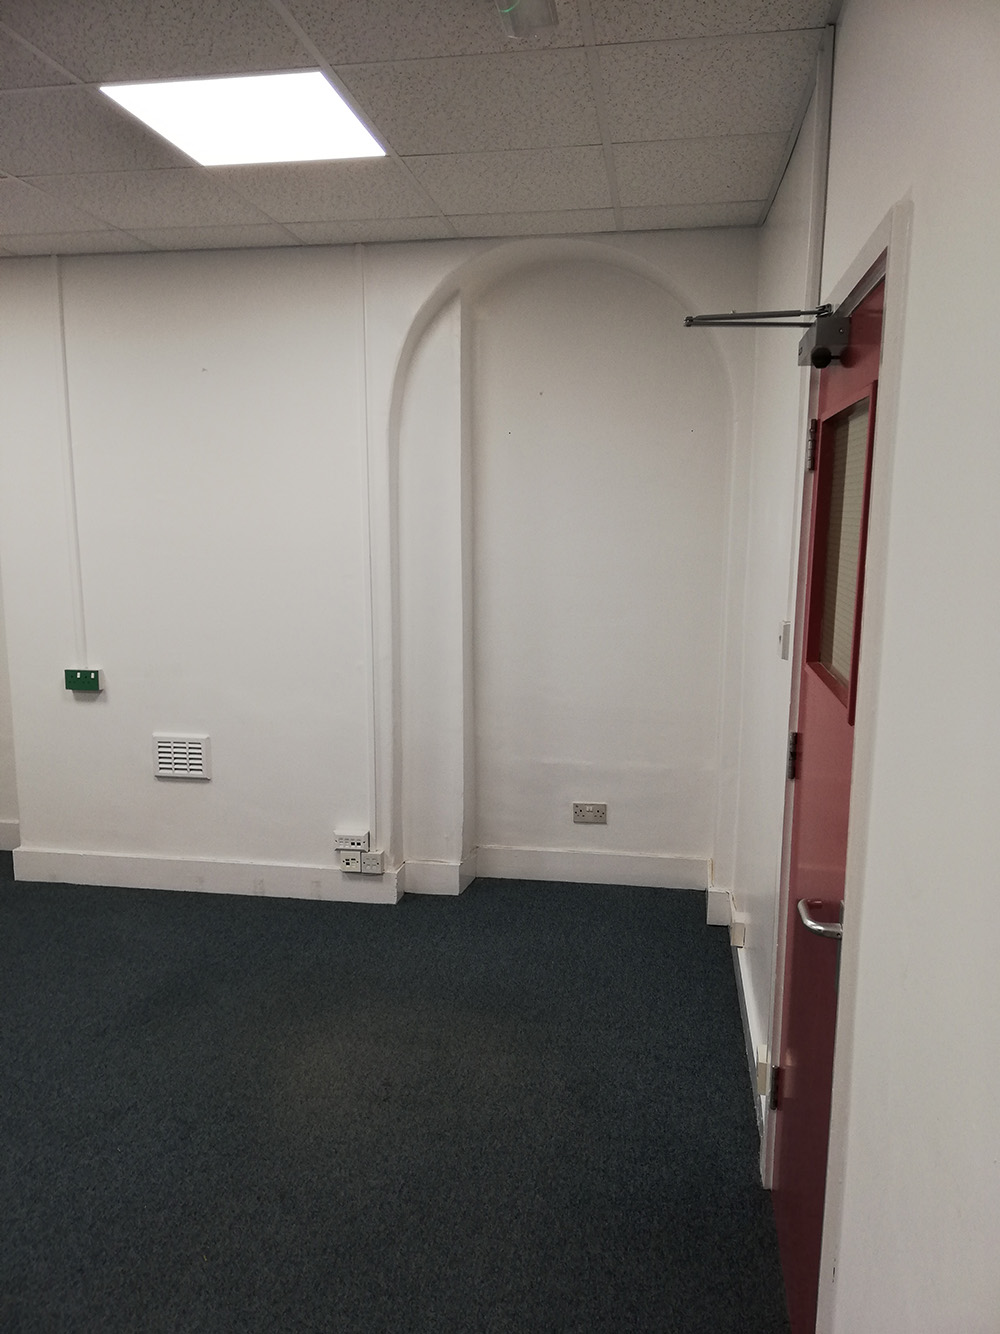 A photo of the office before it was decorated showing the alcove and the door.